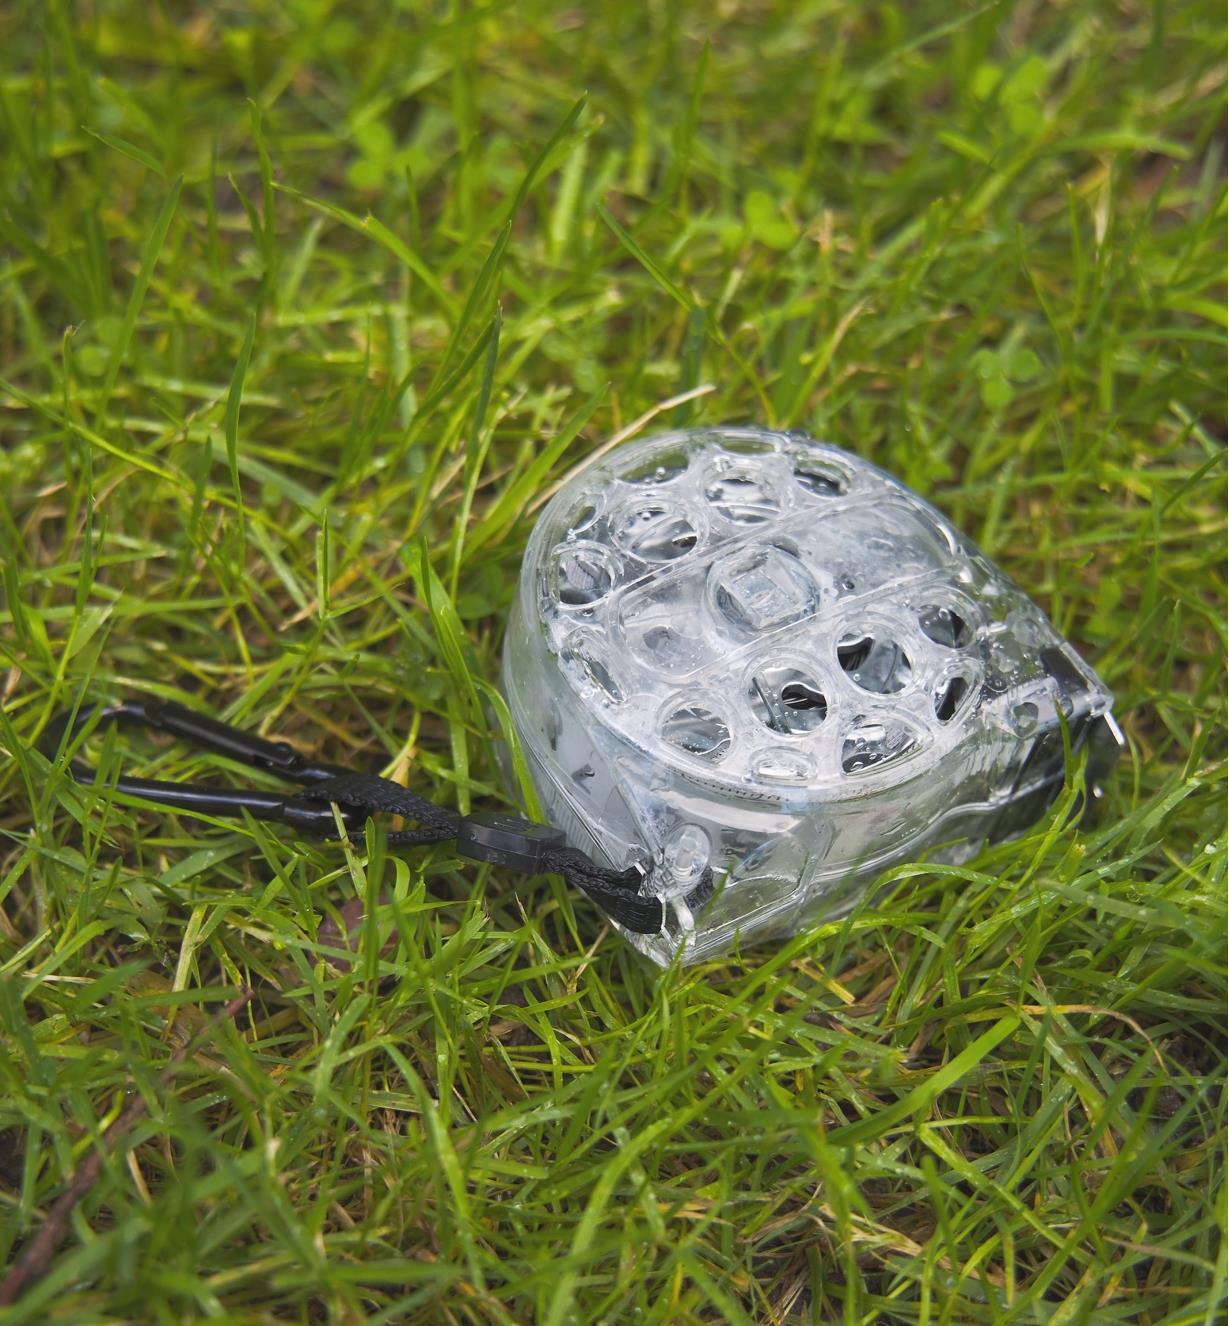 A washable tape measure lying in wet grass